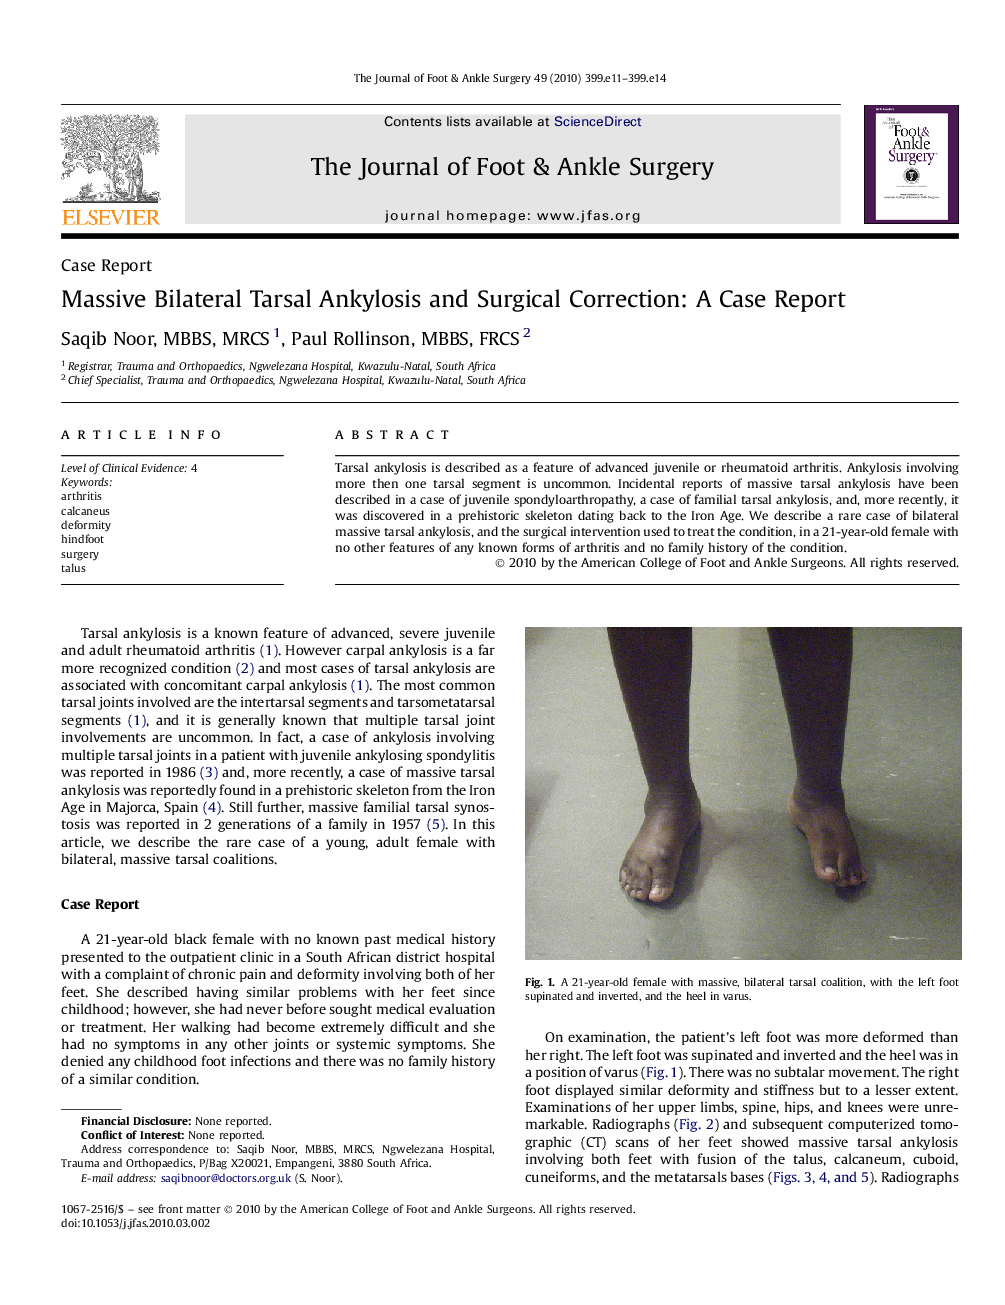 Massive Bilateral Tarsal Ankylosis and Surgical Correction: A Case Report